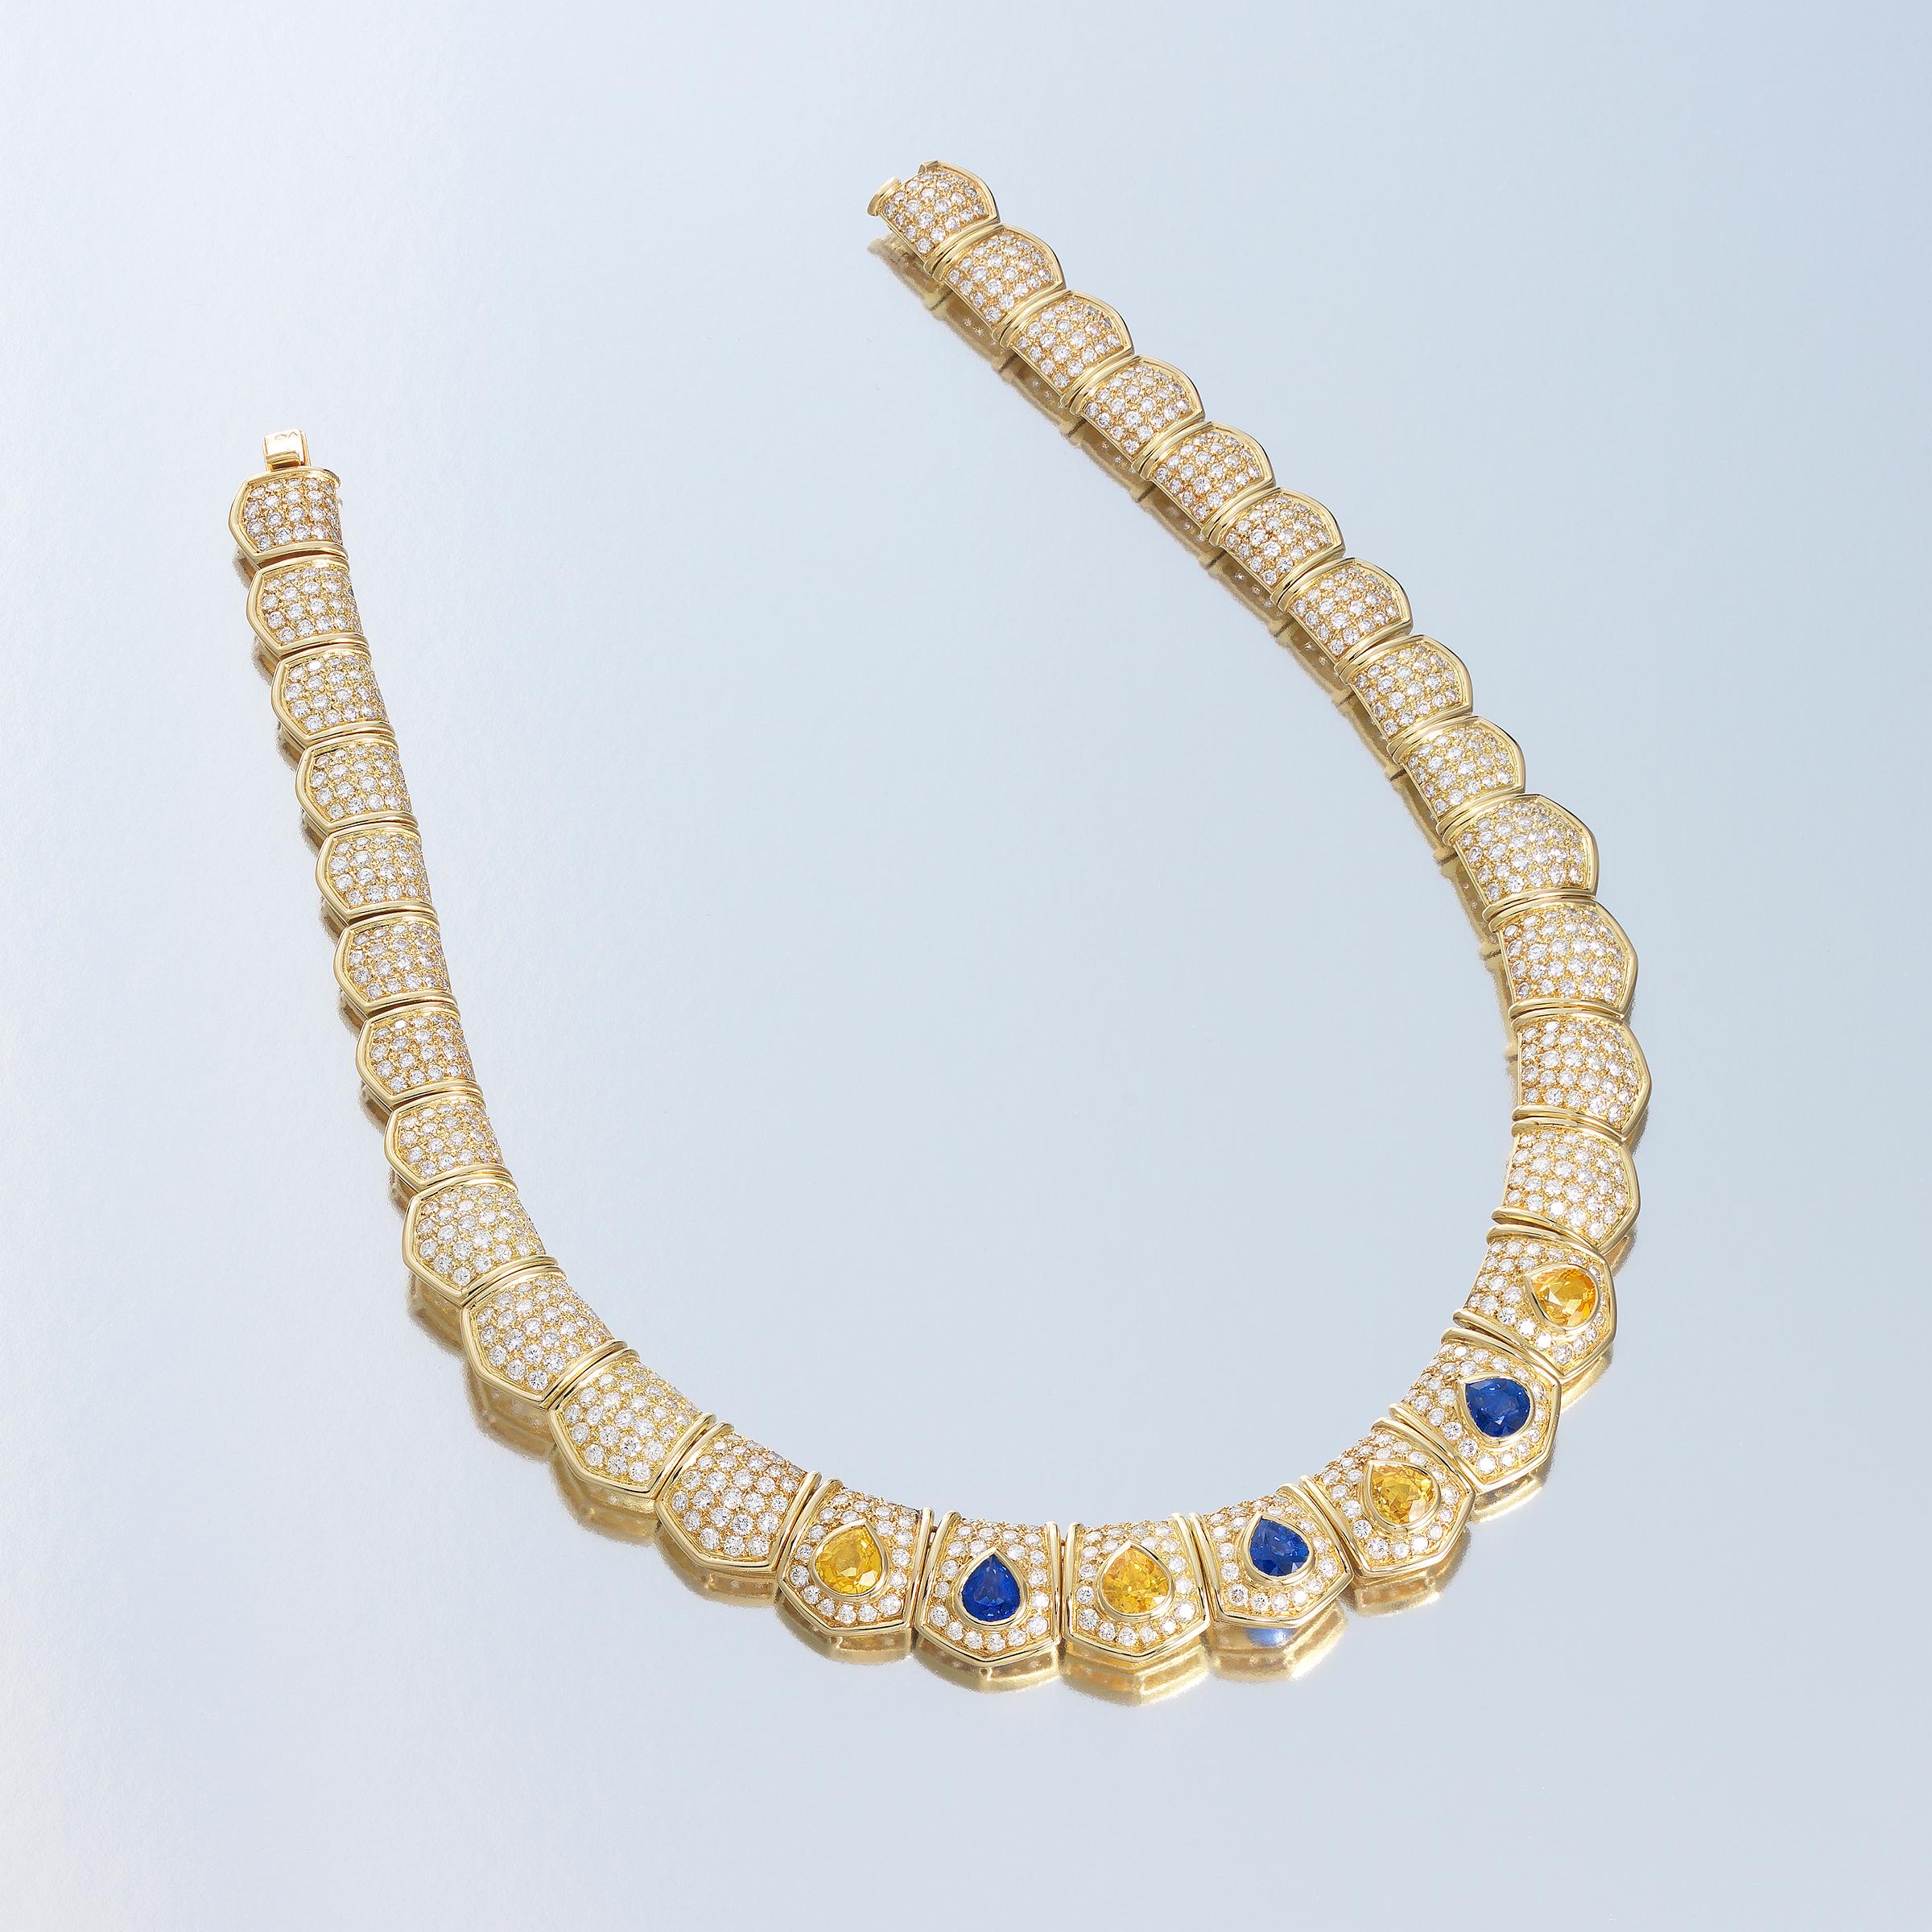 Van Cleef & Arpels dazzling collar necklace bursting with brilliance of approximately 19 carats of finest white diamonds which are complemented by 11 carats of vividly-colored blue and yellow Ceylon sapphires (GIA certified), all masterfully set in